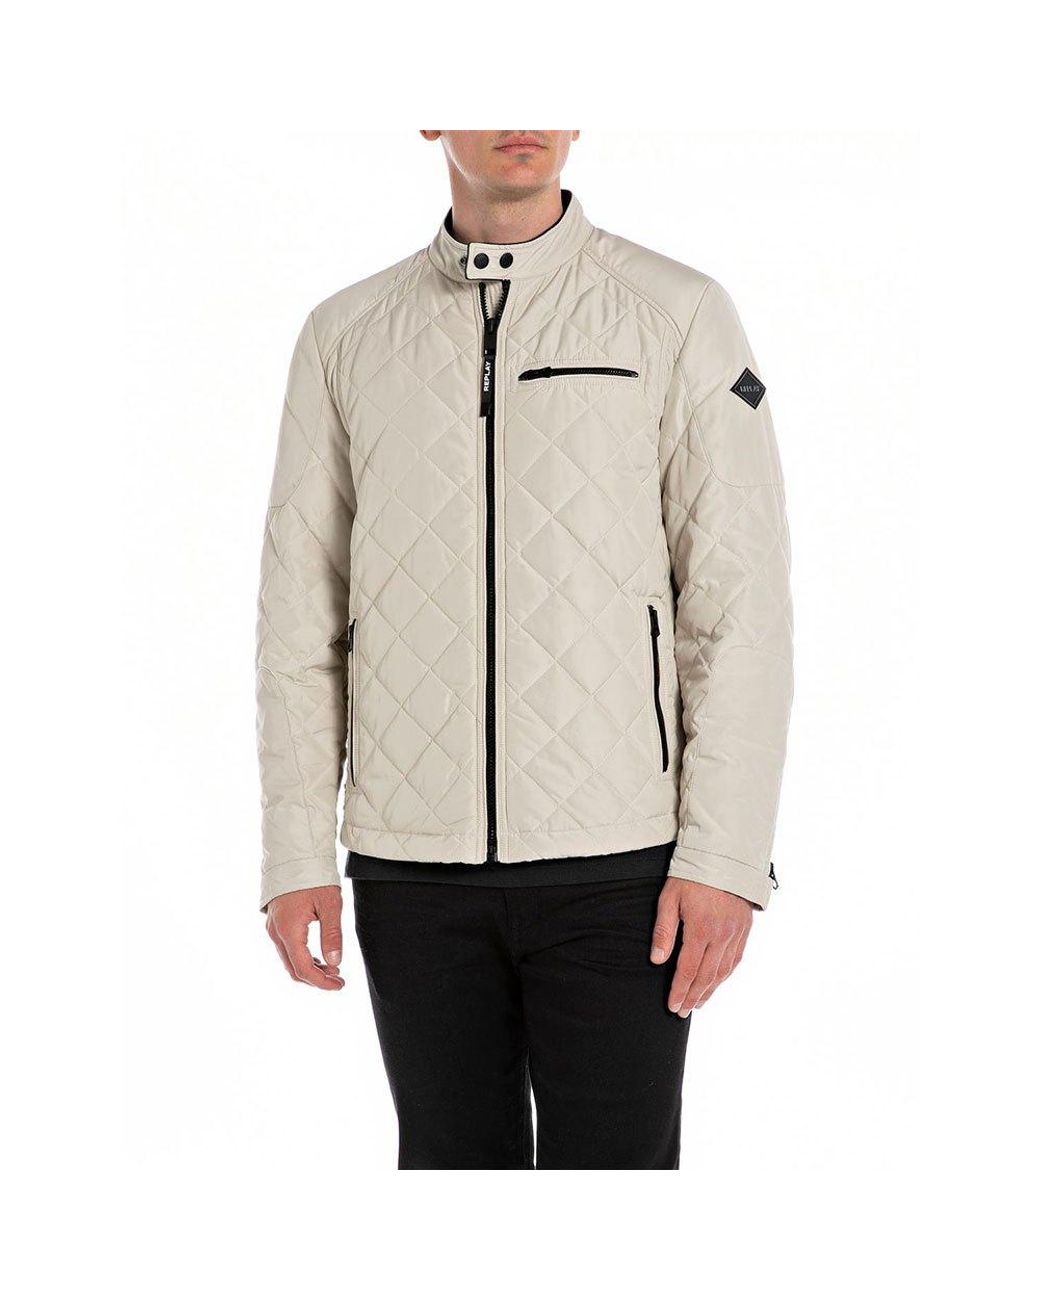 Replay Repay 8000 .000.84442 Jacket in Lyst Natural Men for 